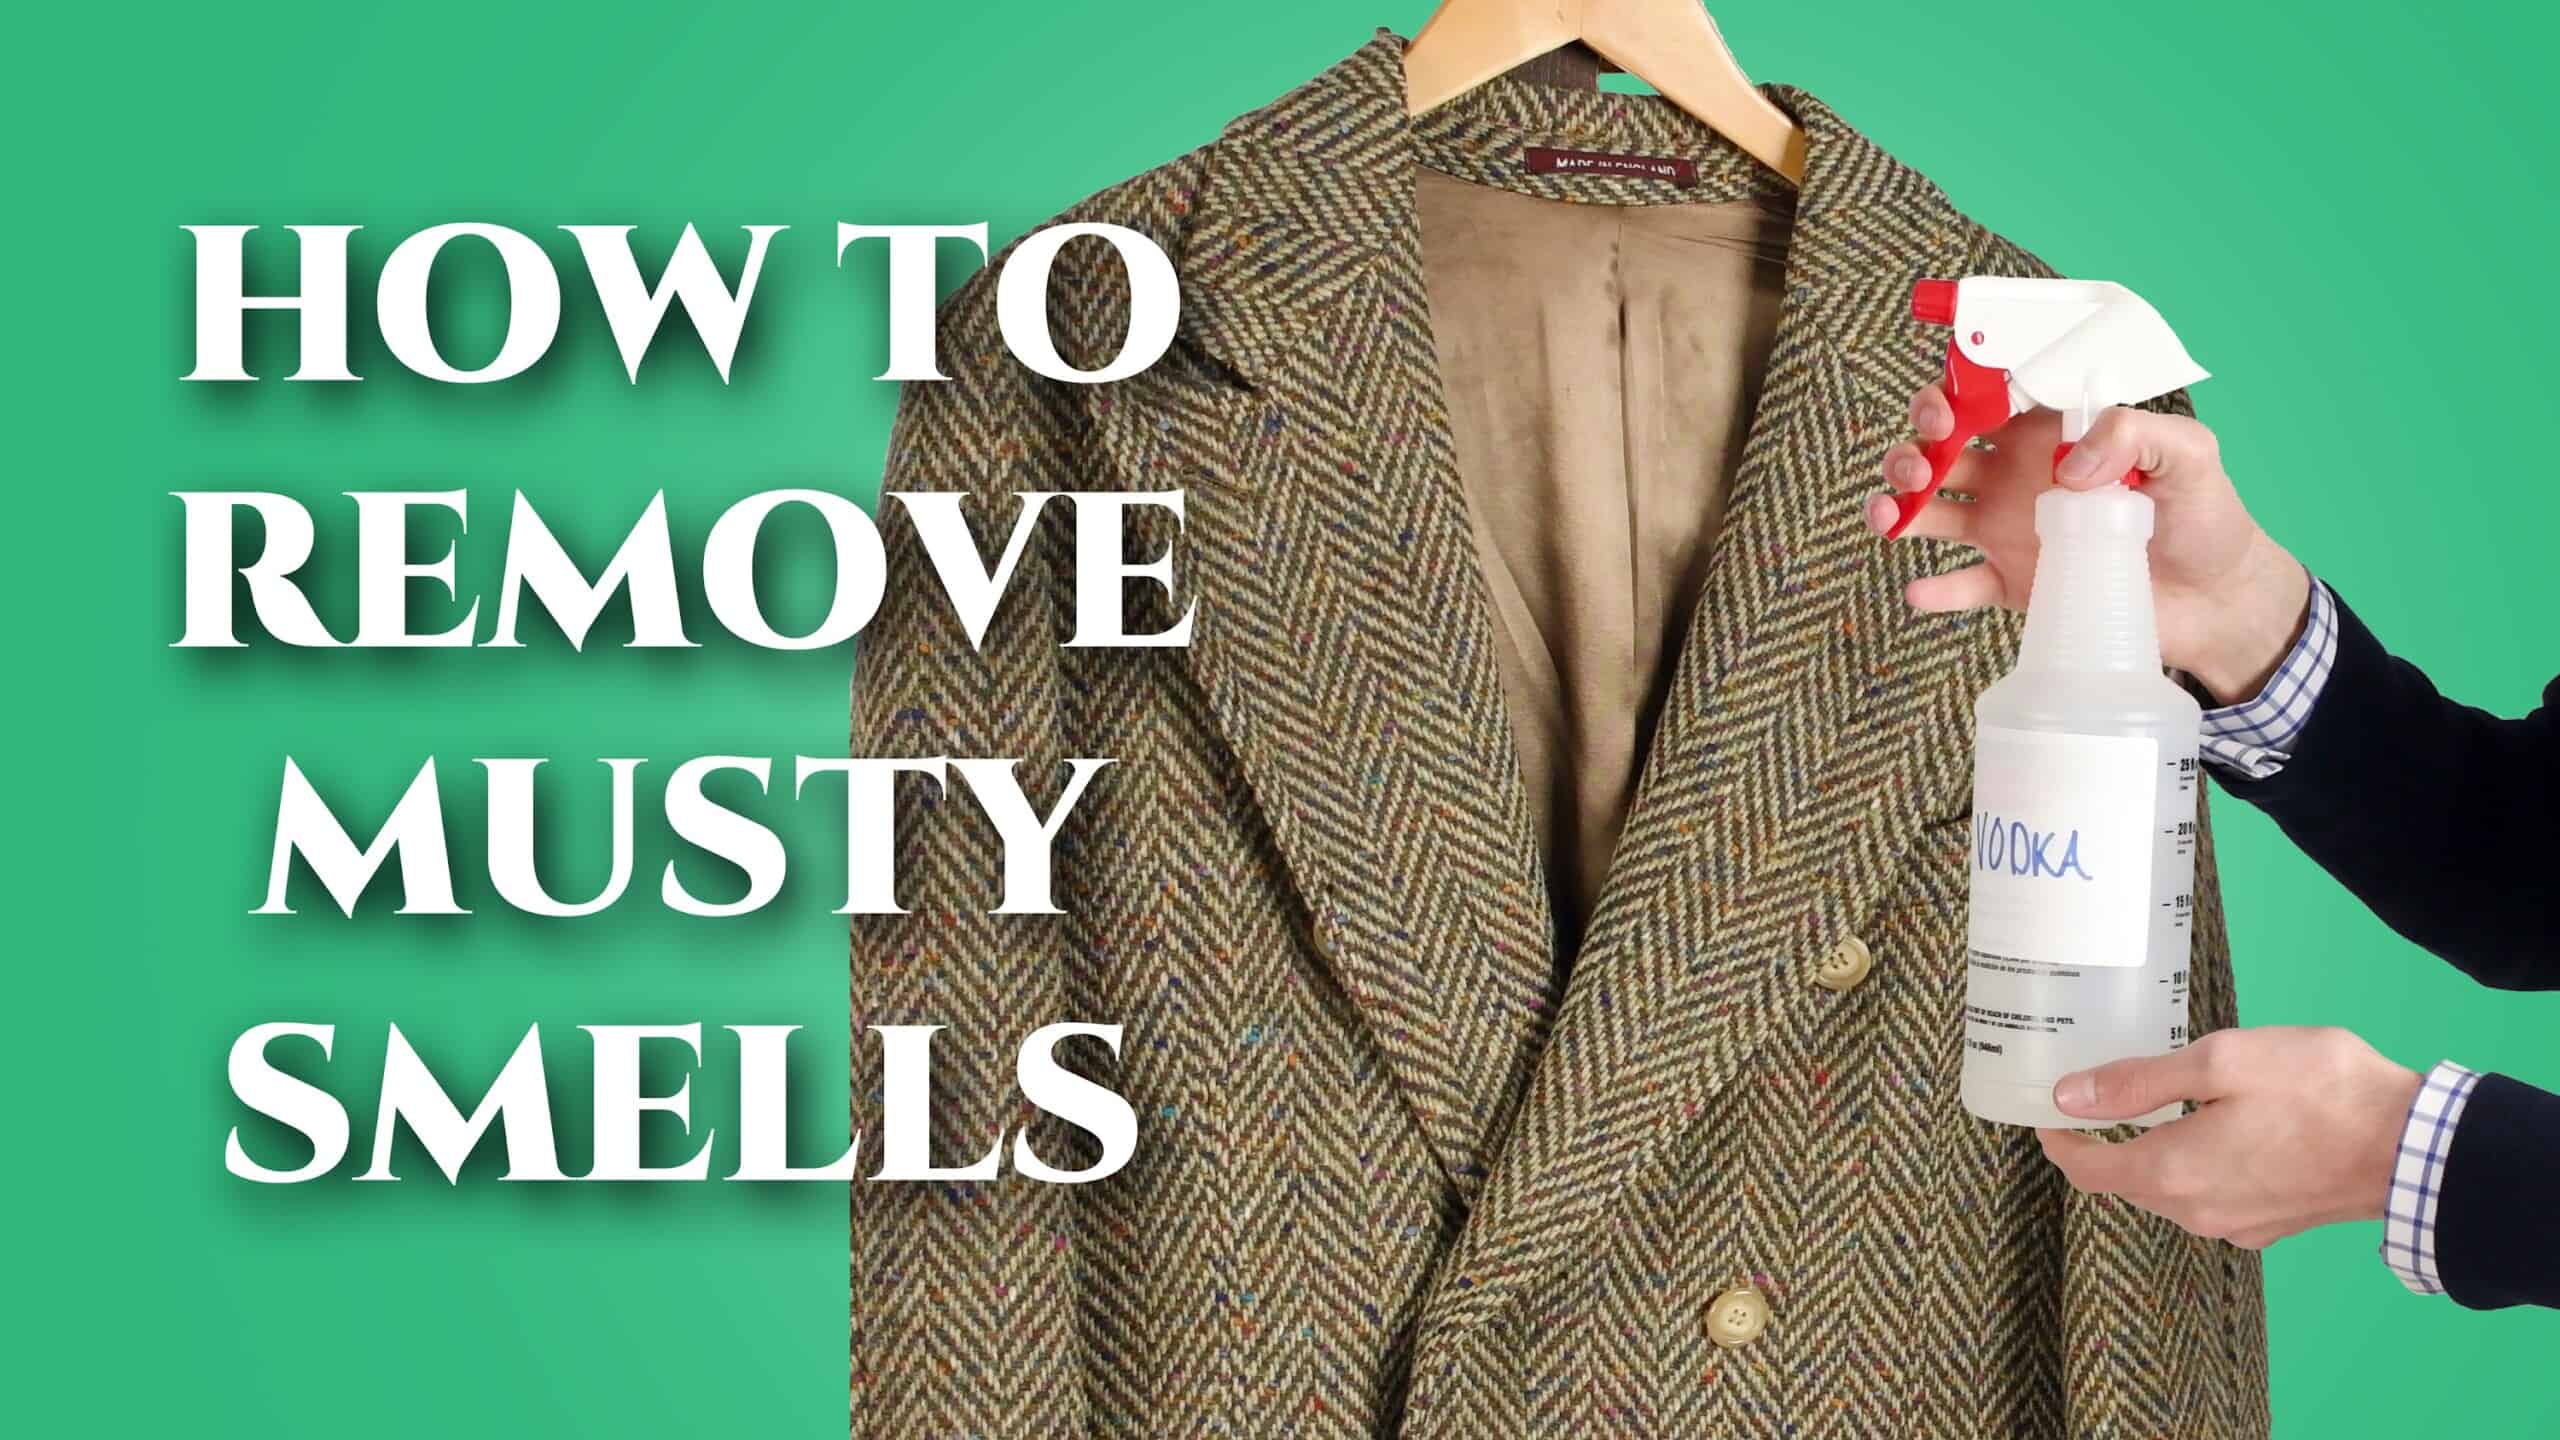 how to remove musty smells 3840x2160 scaled